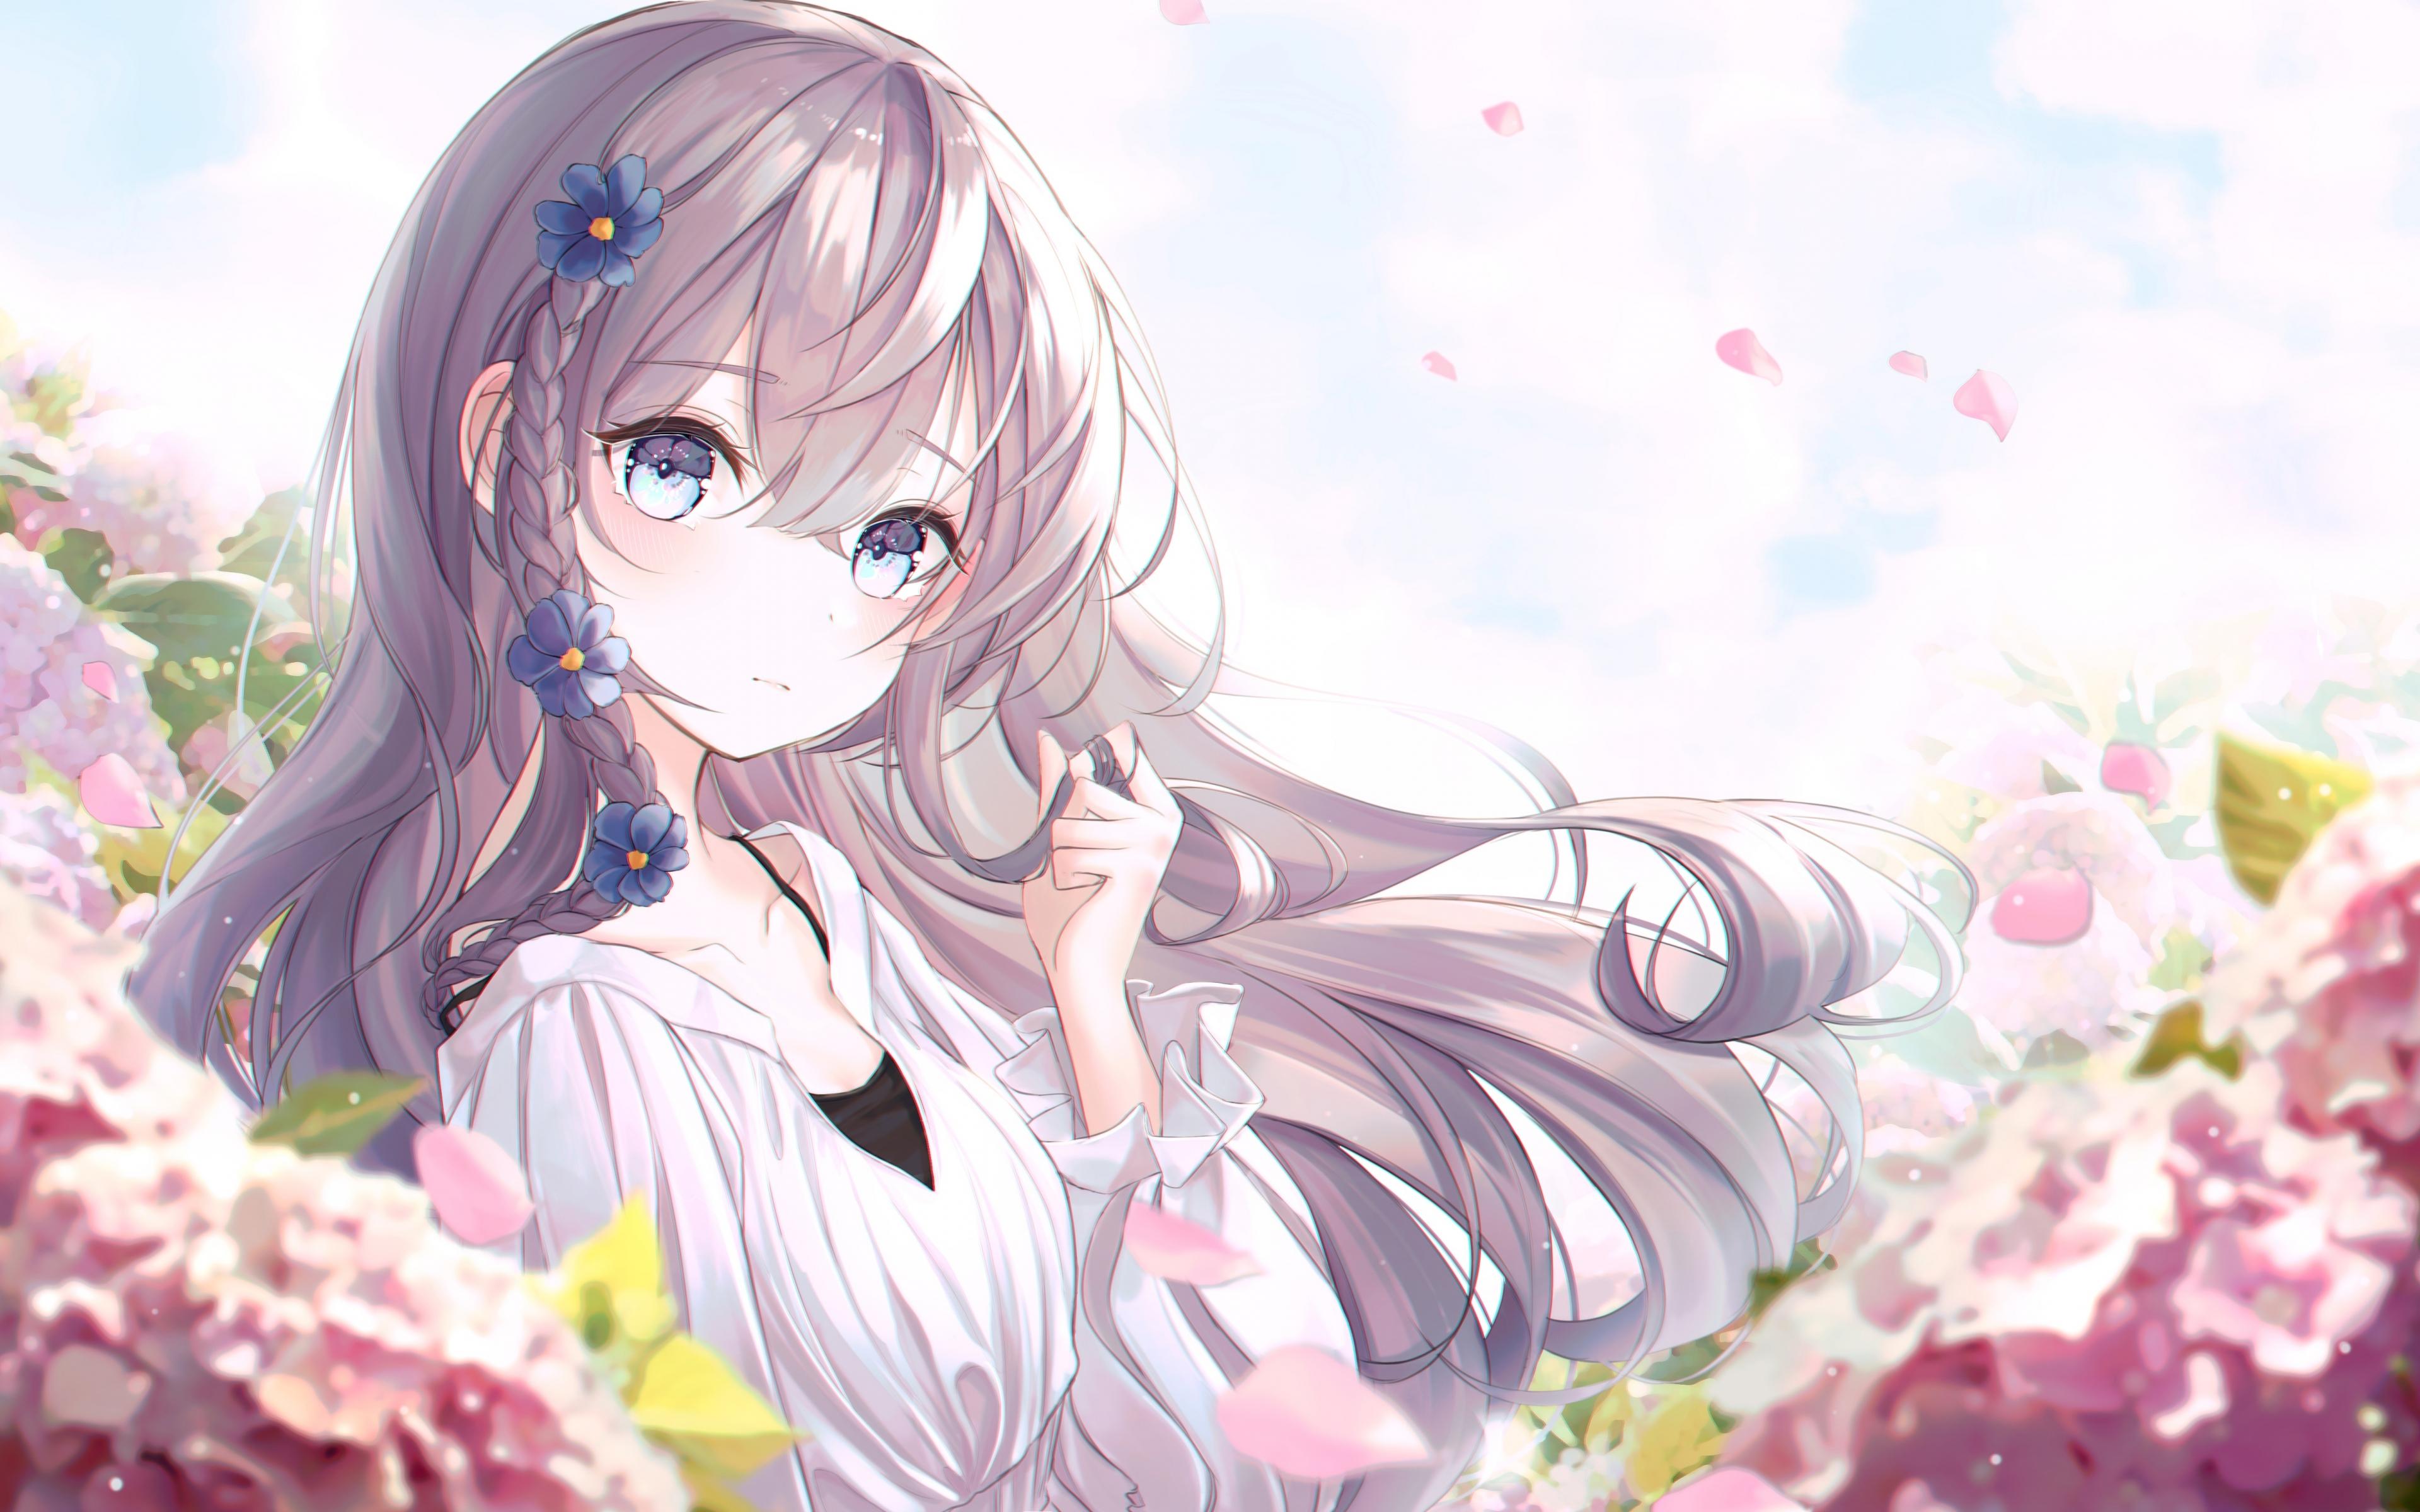 Anime Girl Spring Wallpapers - Top Free Anime Girl Spring Backgrounds ...